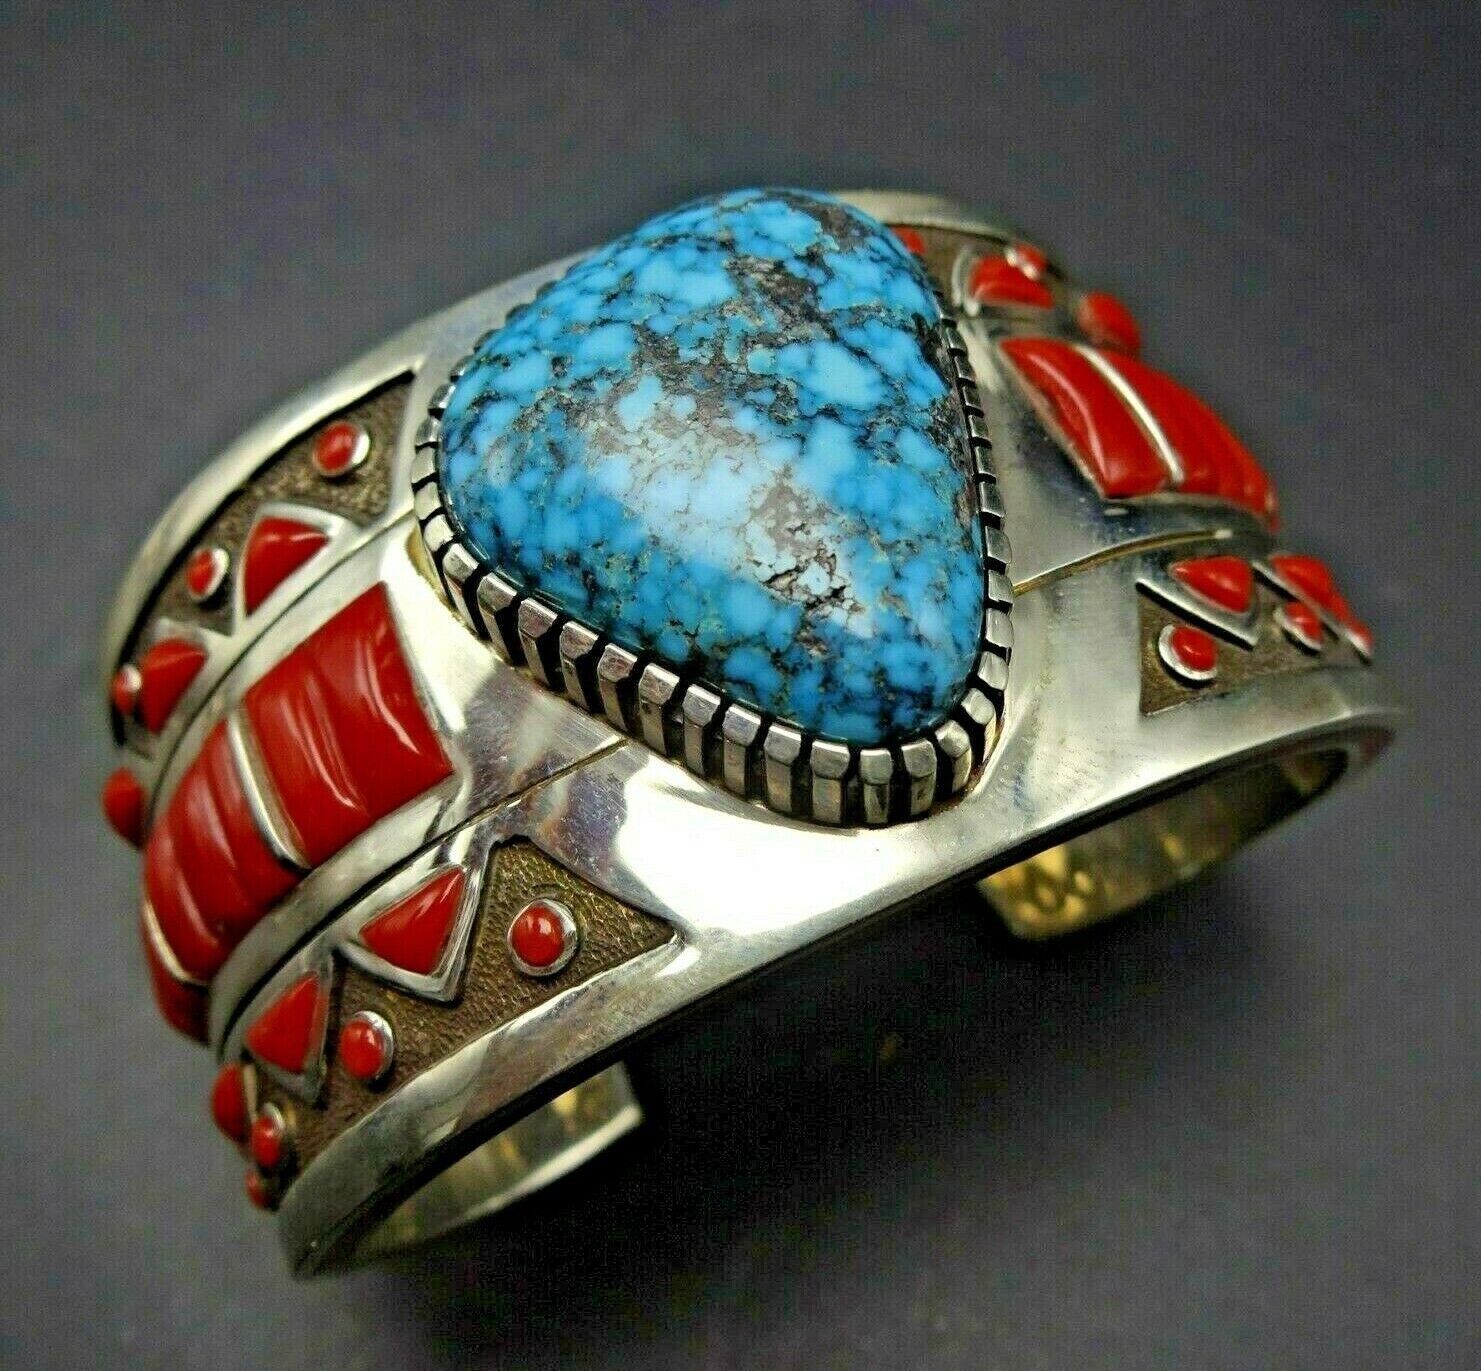 Navajo MICHAEL PERRY SterlingSilver WATERWEB TURQUOISE CORAL INLAY Cuff BRACELET